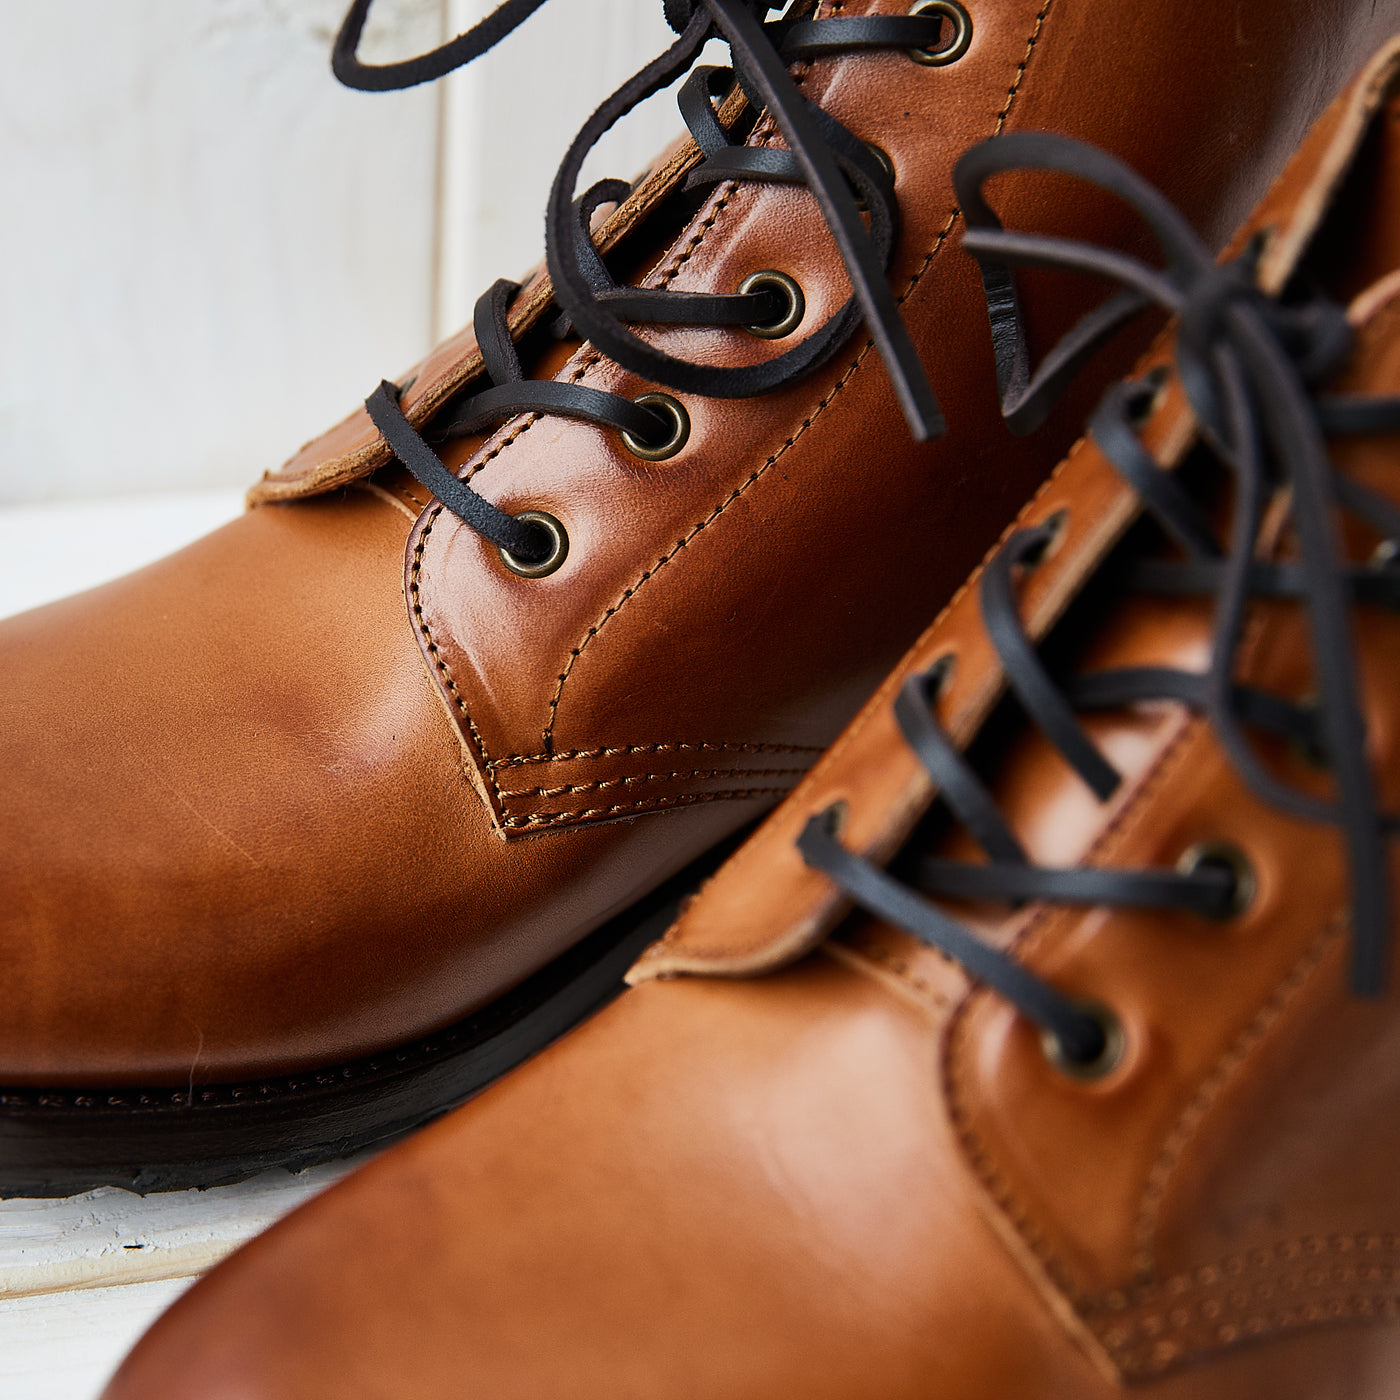 Oodoo Boots - The Work Boots - Cognac Tan Leather